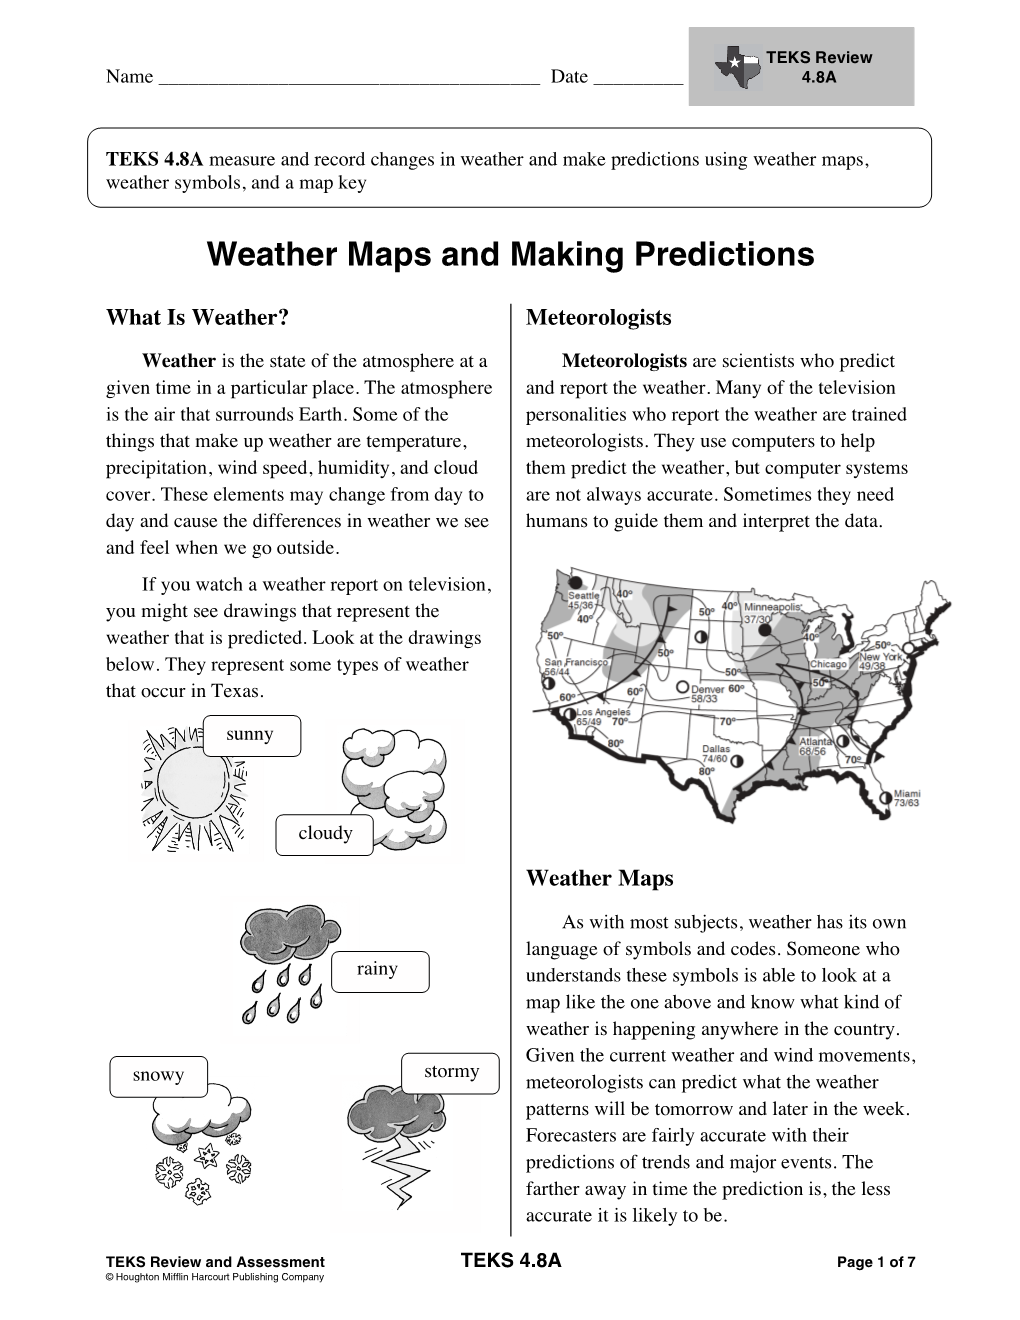 Weather Maps and Making Predictions